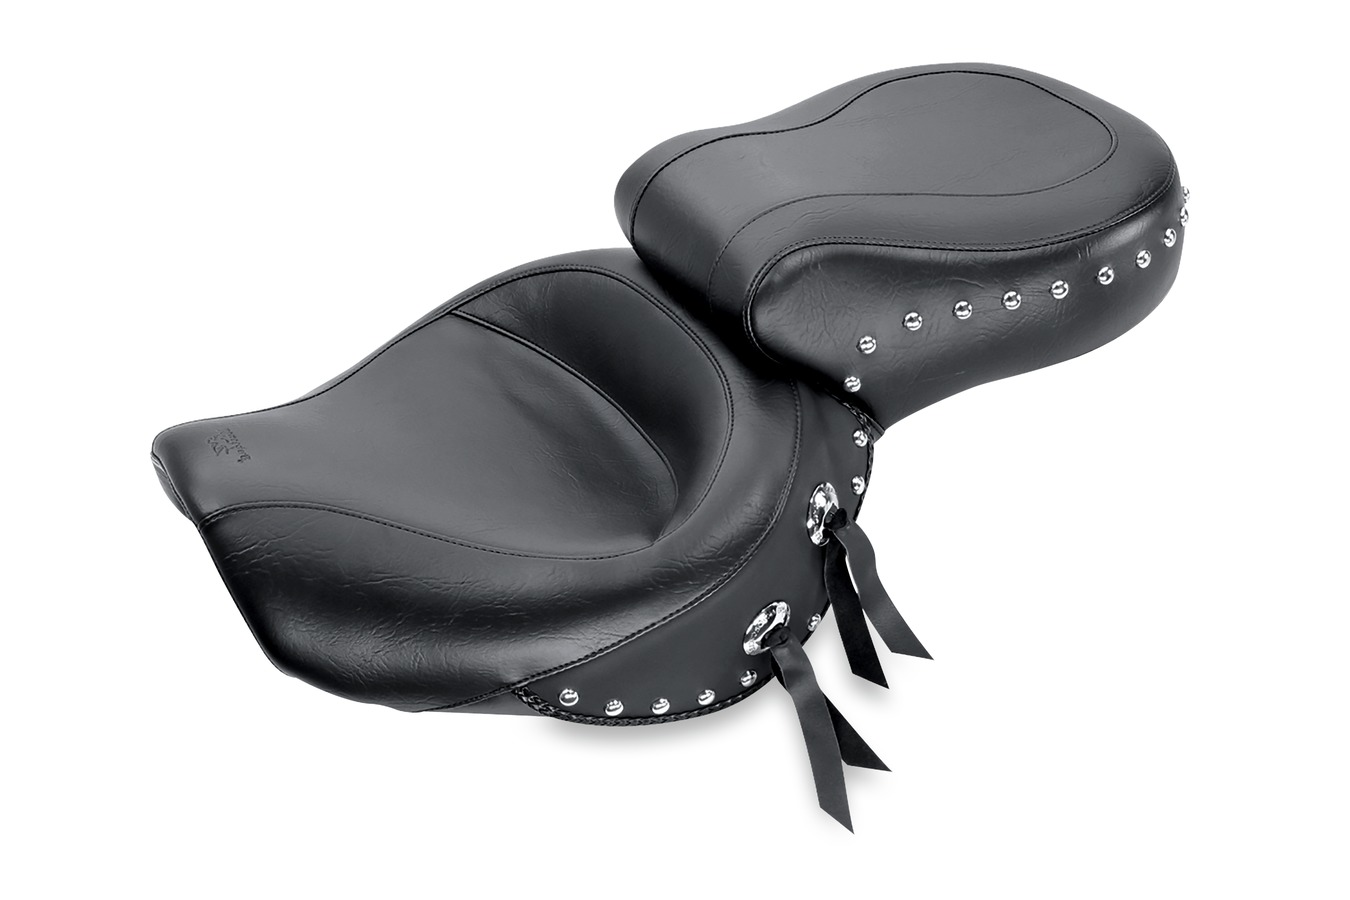 Wide Touring One-Piece Seat for Harley-Davidson Dyna 2006-